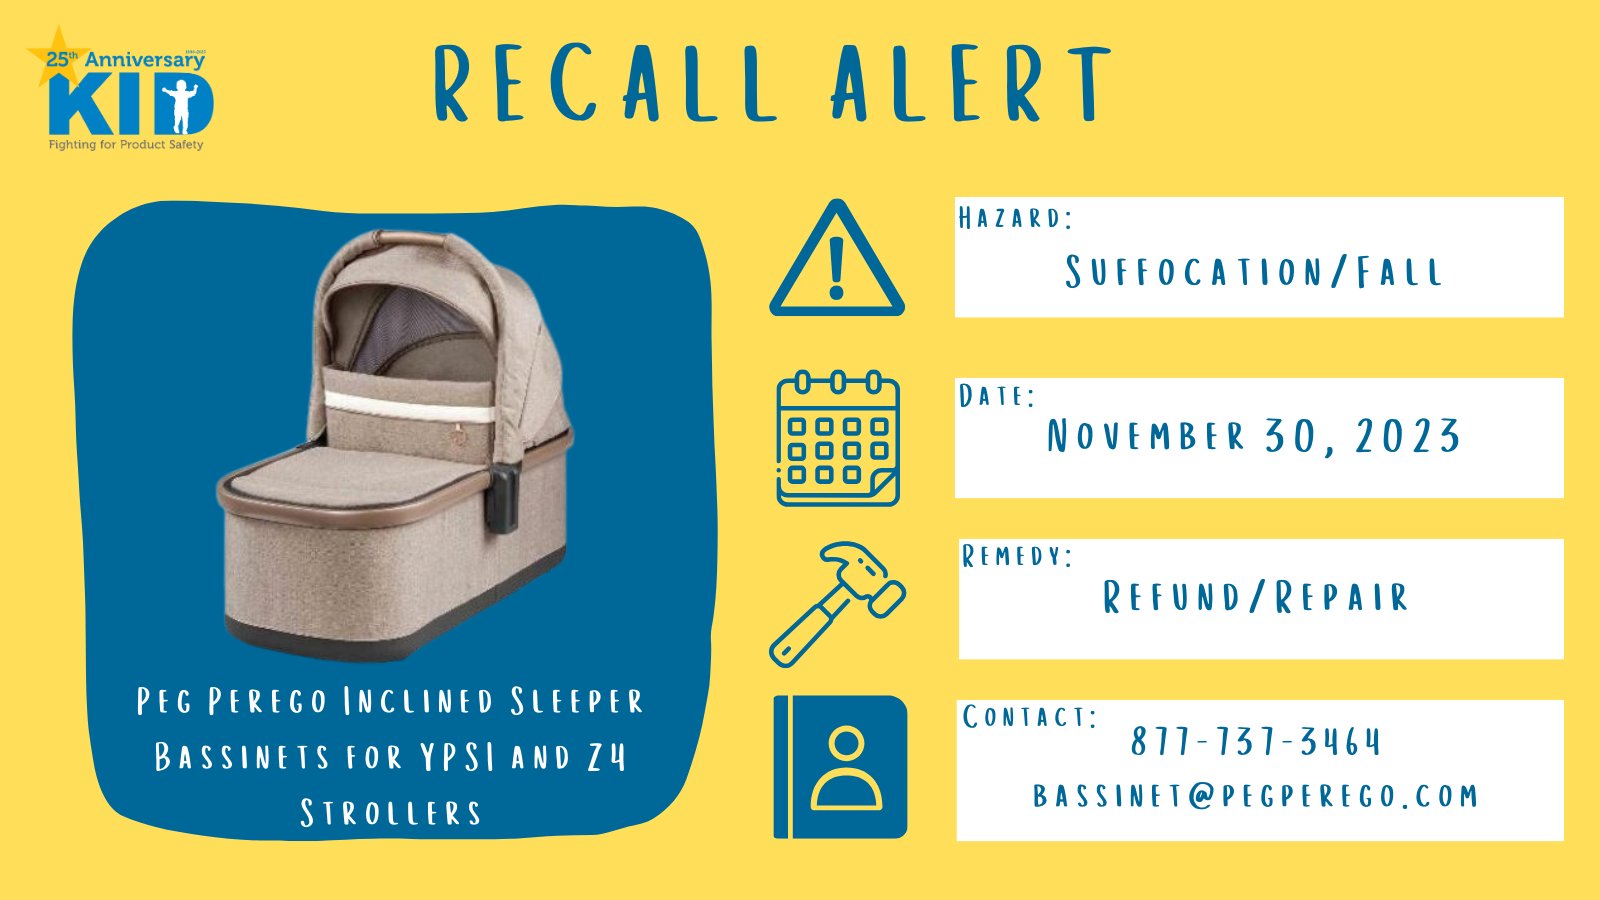 Peg Perego Recalls Inclined Sleeper Bassinets for YPSI and Z4 Strollers Due  to Risk of Suffocation and Fall Hazard; Violation of Federal Safety  Standards (Recall Alert)